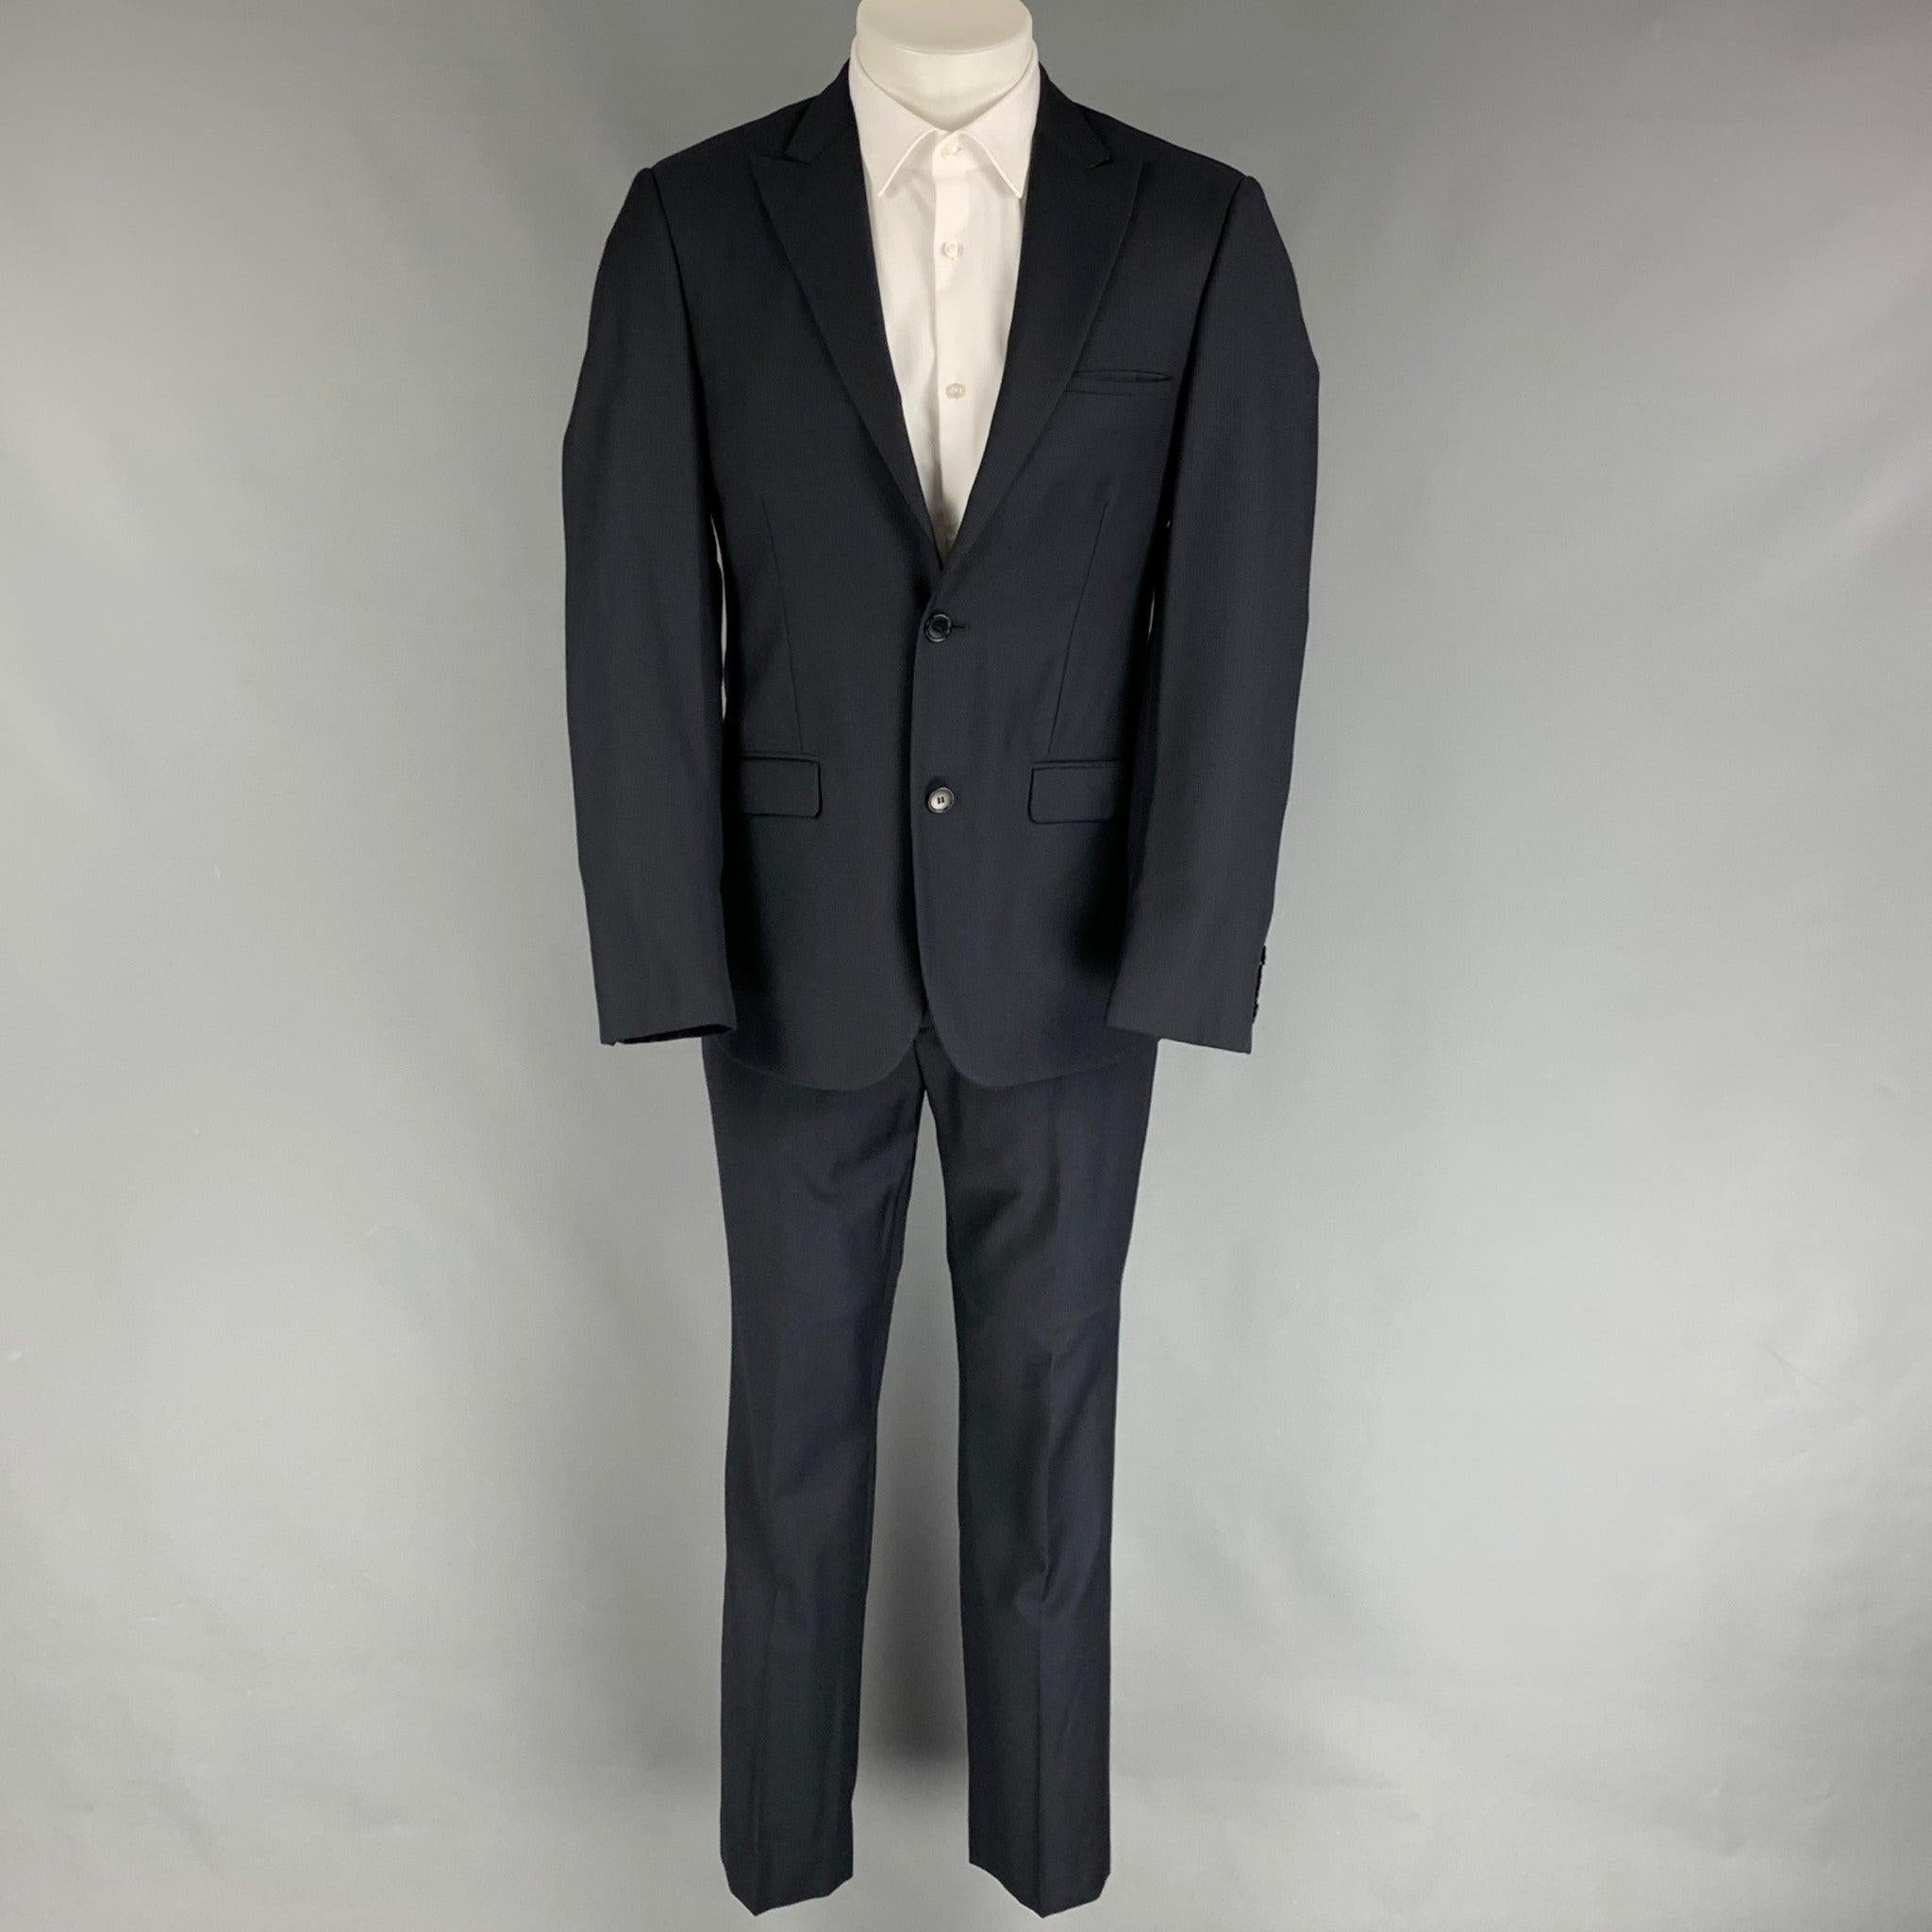 CALVIN KLEIN COLLECTION
suit comes in a navy grid wool with a full liner and includes a single breasted, double button sport coat with a peak lapel and matching flat front trousers. Very Good Pre-Owned Condition. 

Marked:   46/36 

Measurements: 
 